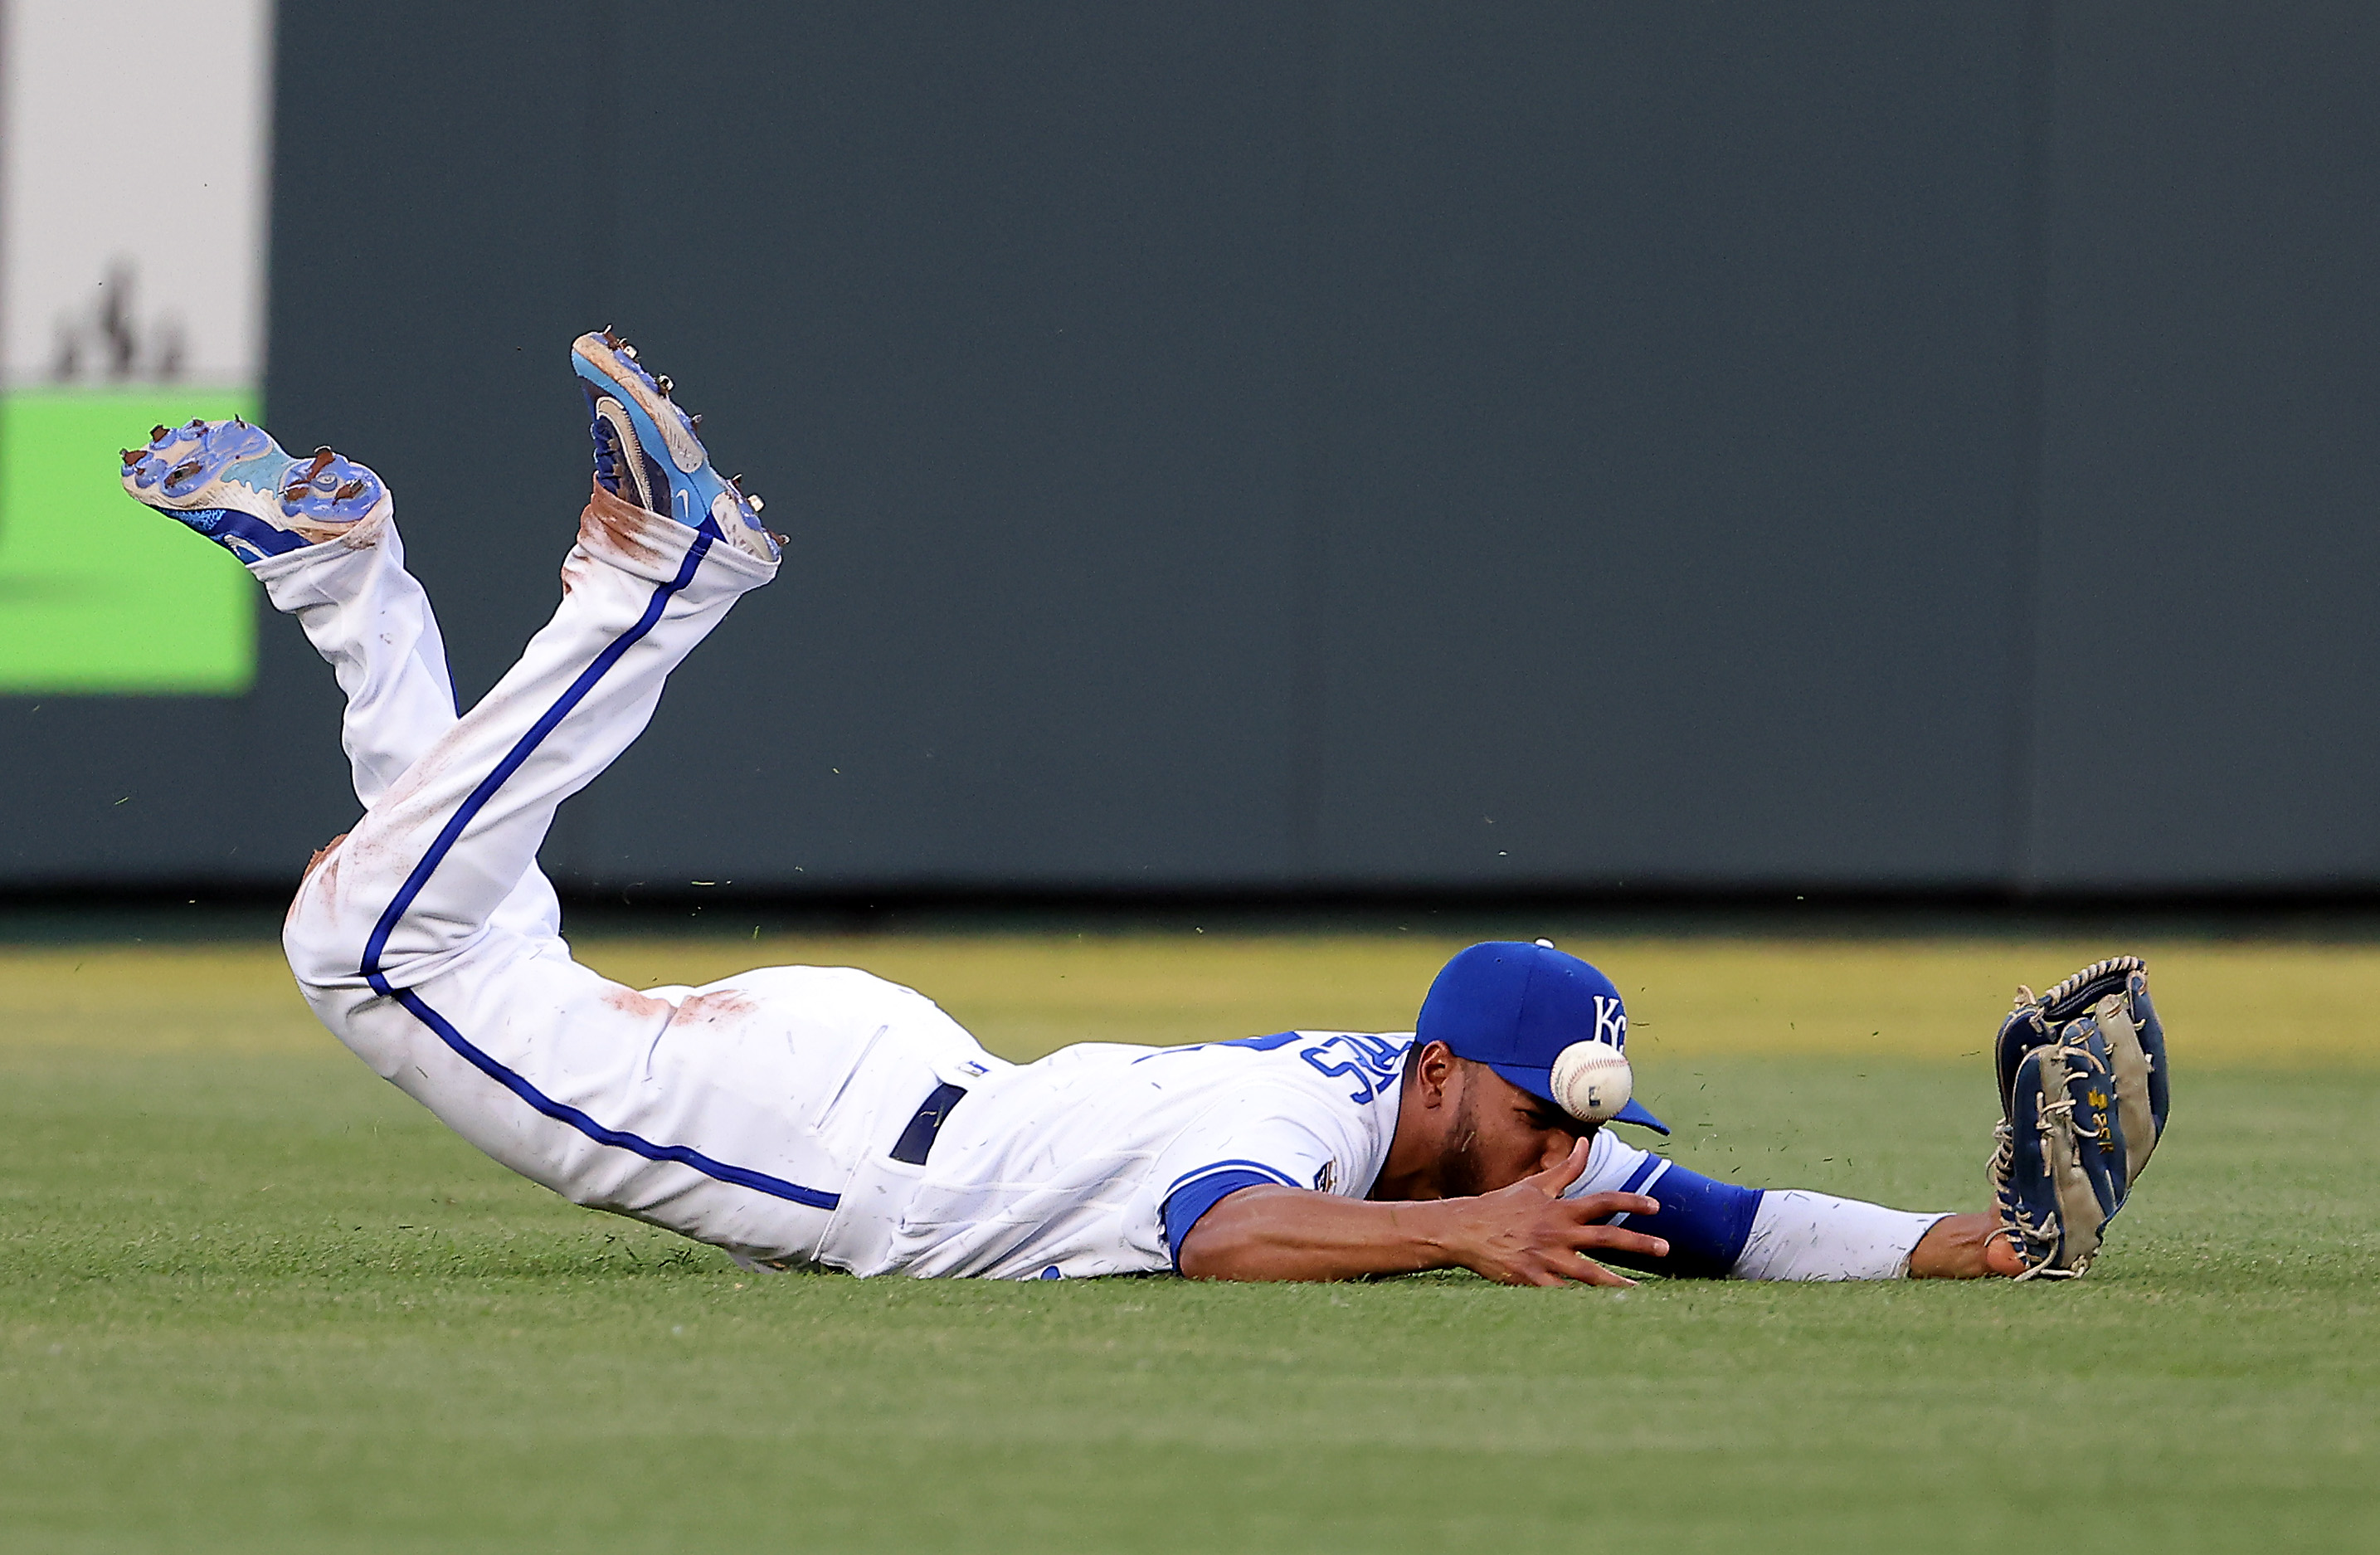 Edward Olivares #14 of the Kansas City Royals dives for but misses the ball in the outfield during the 4th inning of the game against the Cincinnati Reds at Kauffman Stadium on June 14, 2023 in Kansas City, Missouri.